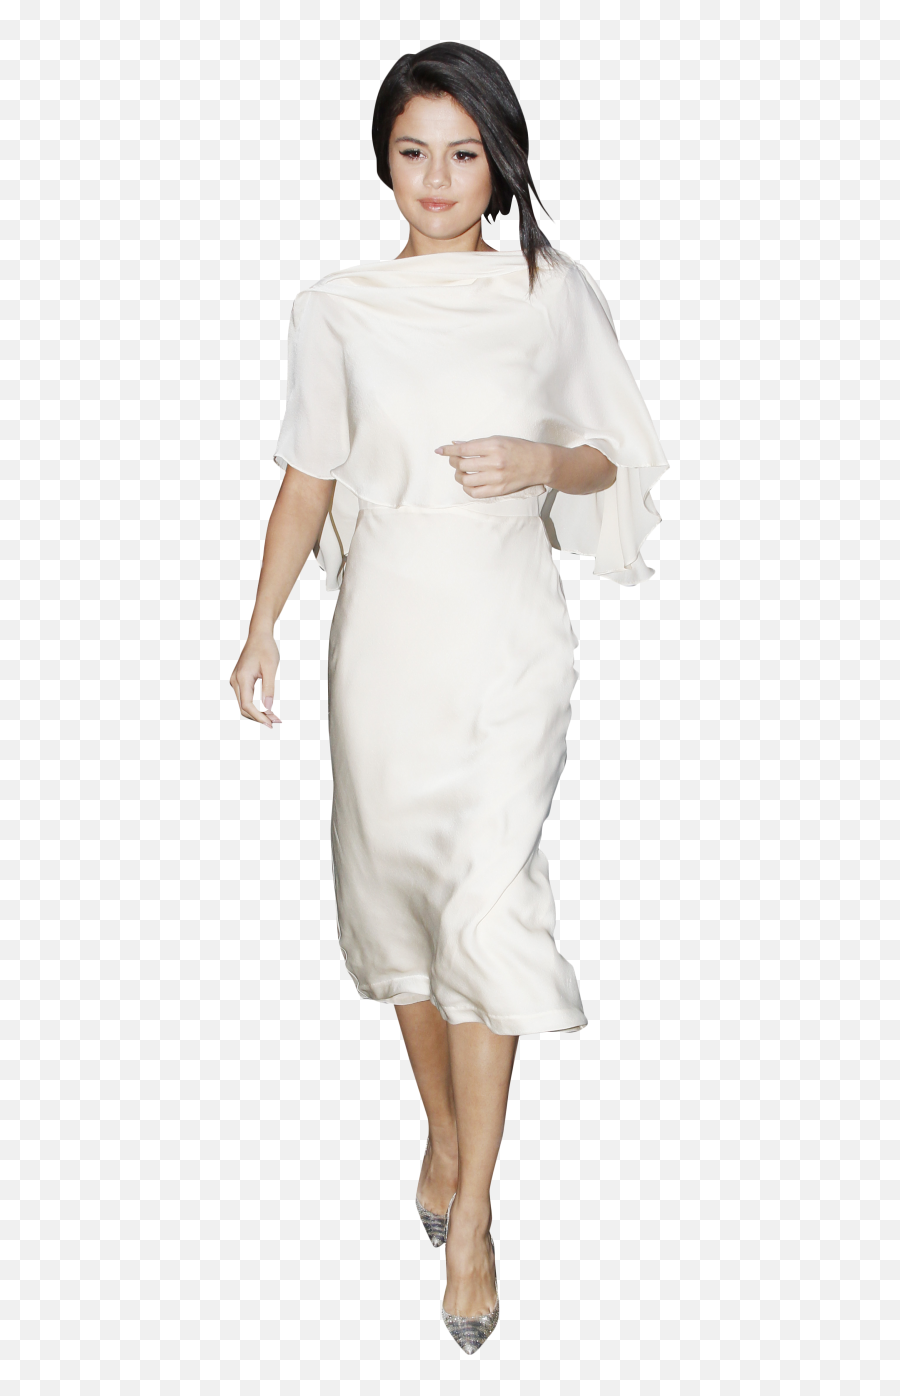 Selena Gomez White Dress Png Image - Purepng Free Cocktail Dress,Woman In Dress Png